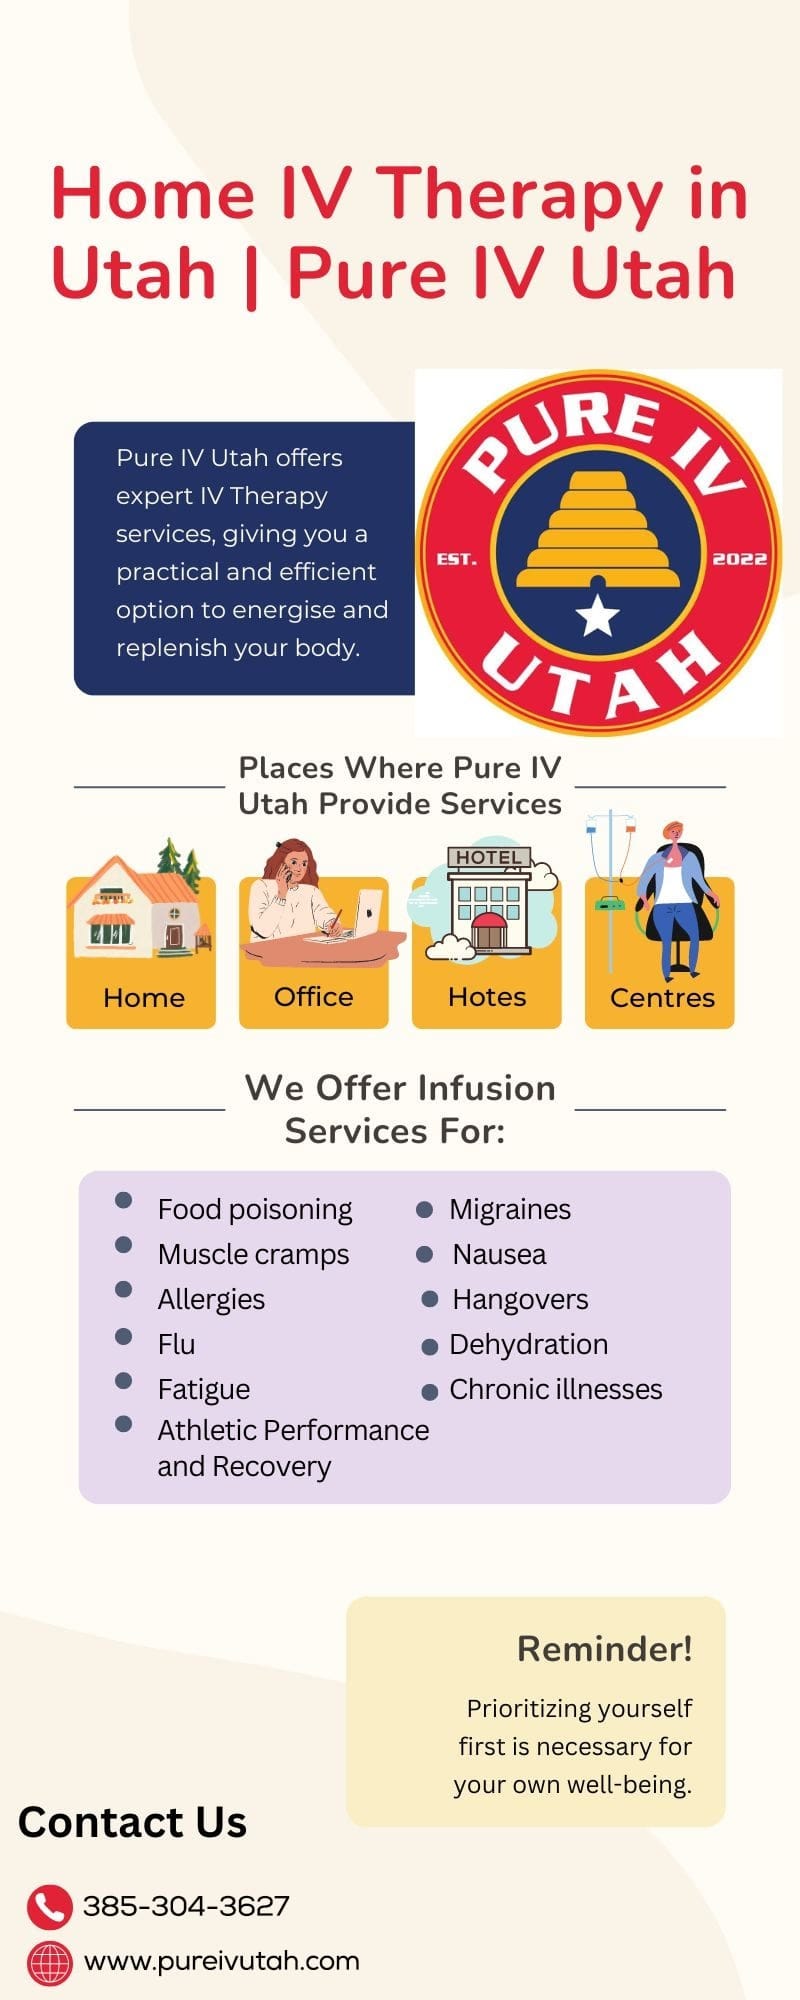 IV Therapy in Utah: A Convenient and Effective Treatment Option - Pure IV Utah - Medium